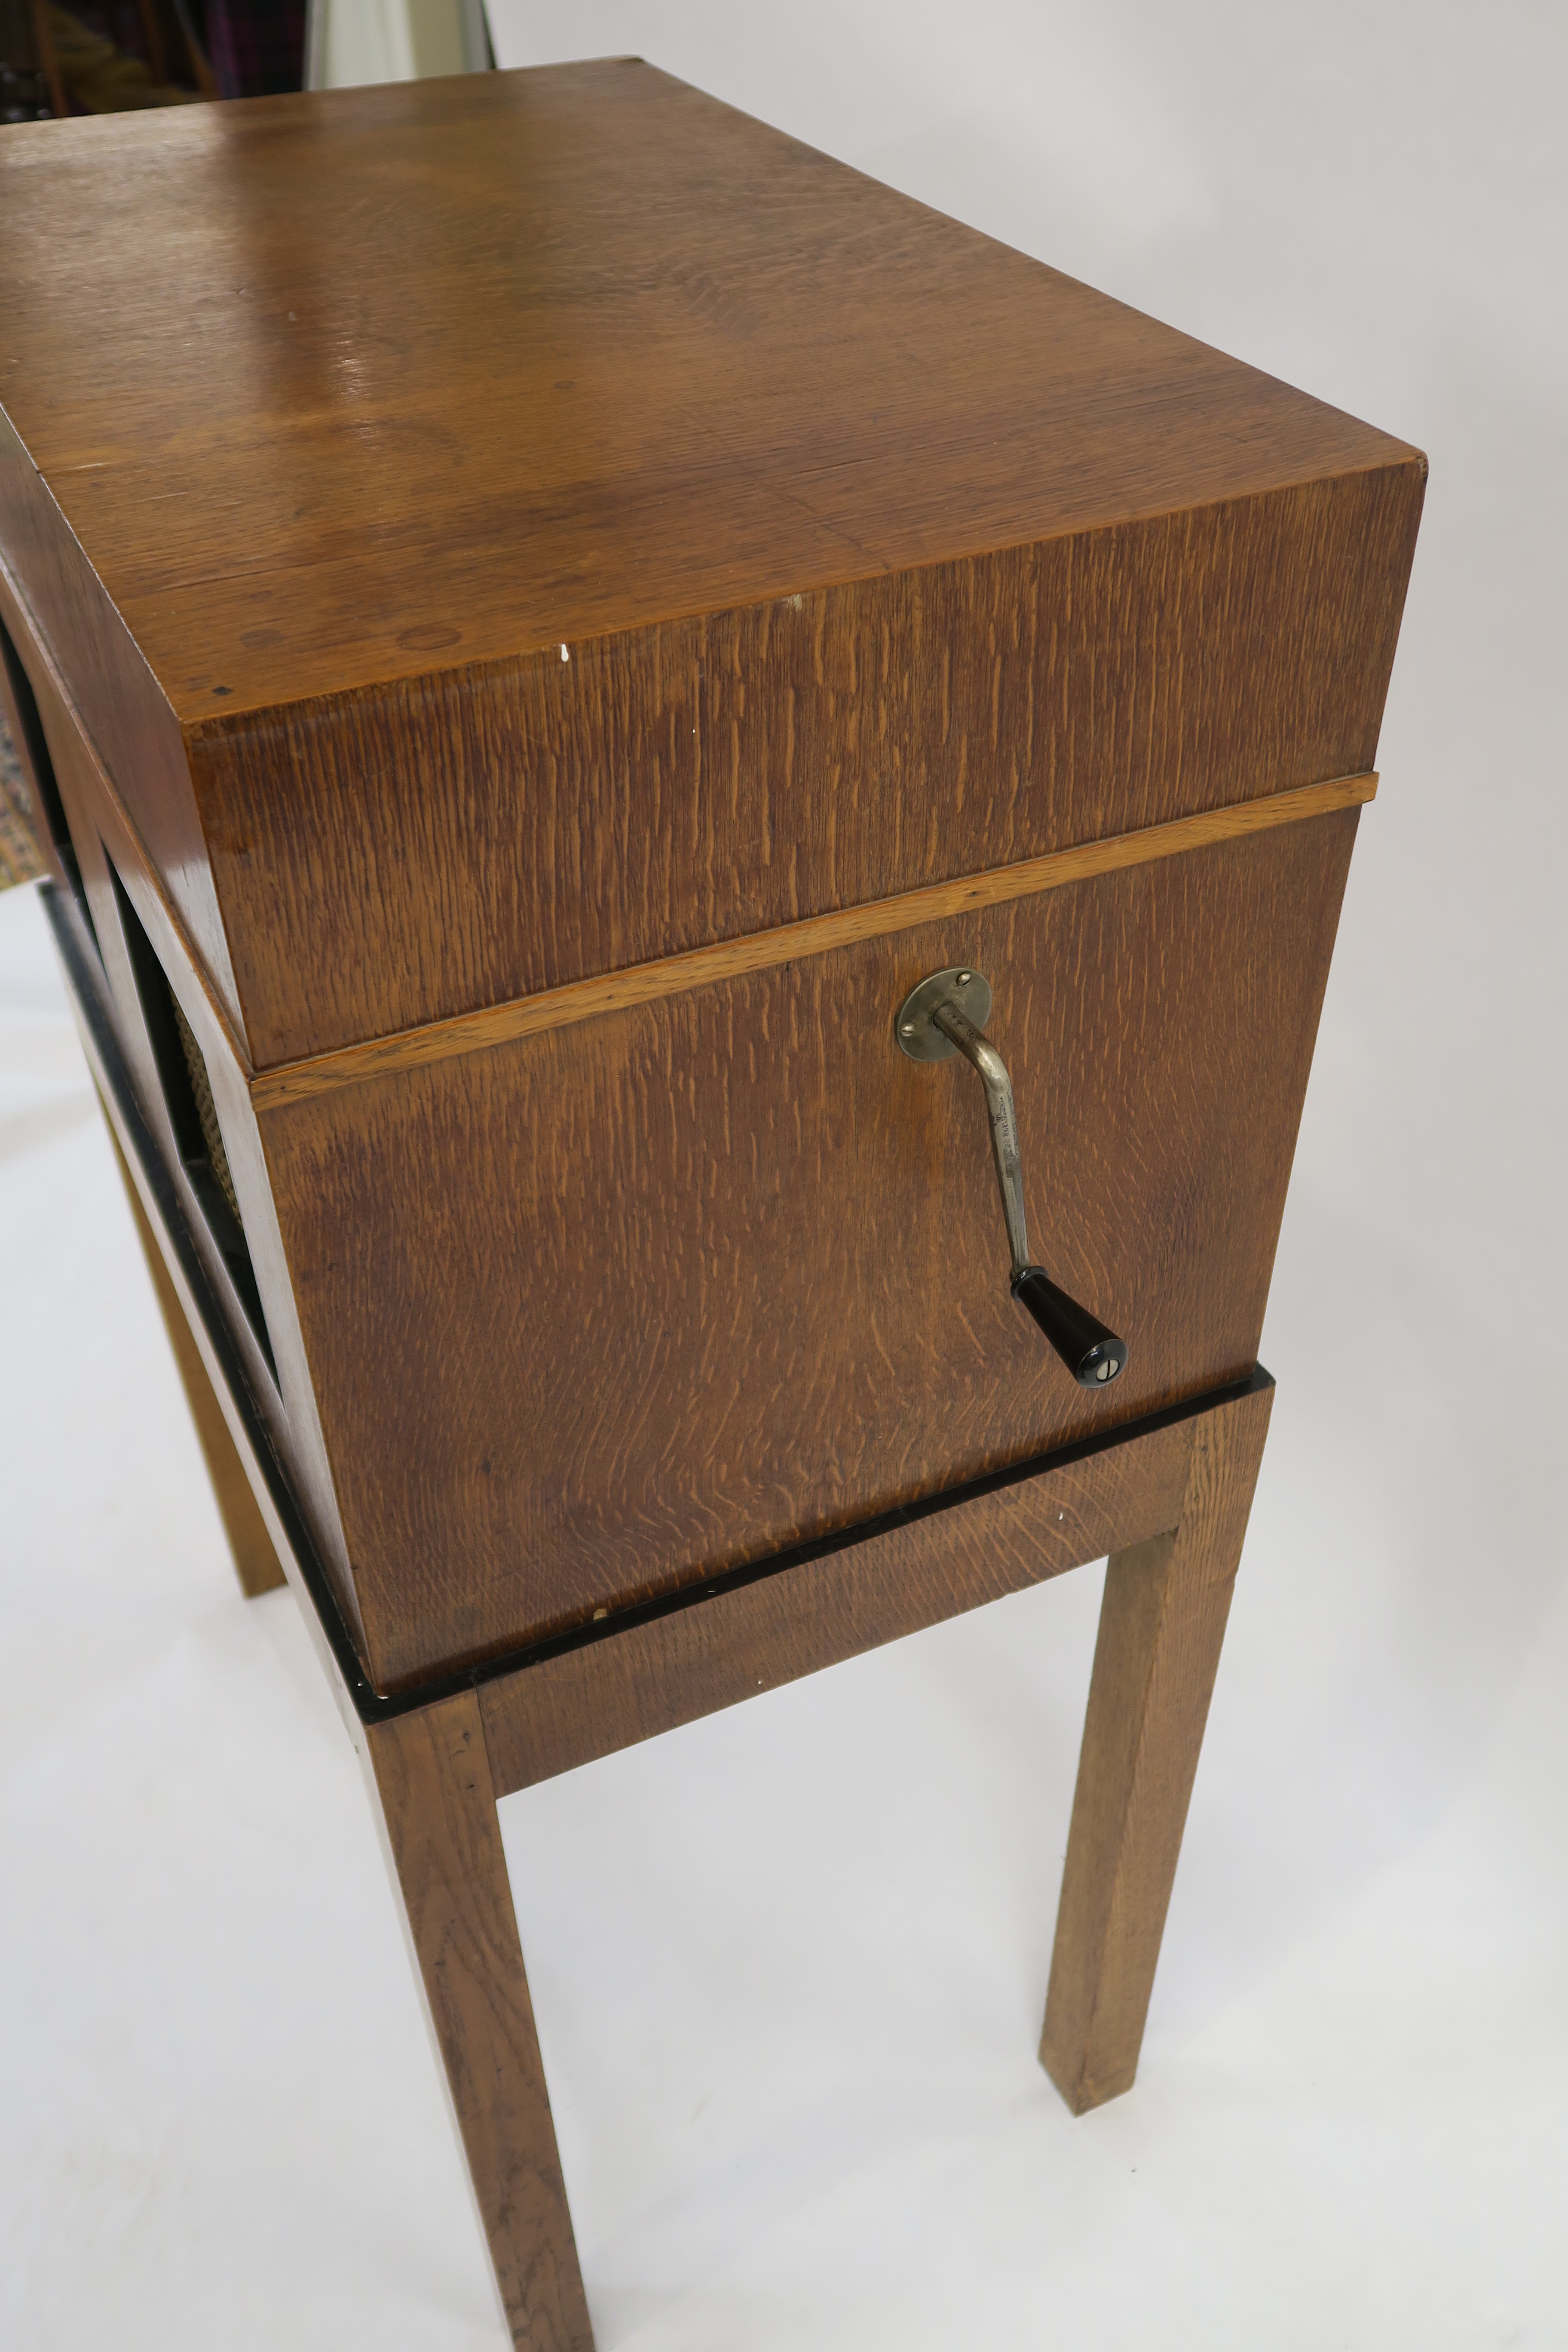 AN EXPERT HANDMADE GRAMOPHONE with chrome arm and pick up in oak case on oak stand, 105cm high x - Image 12 of 17